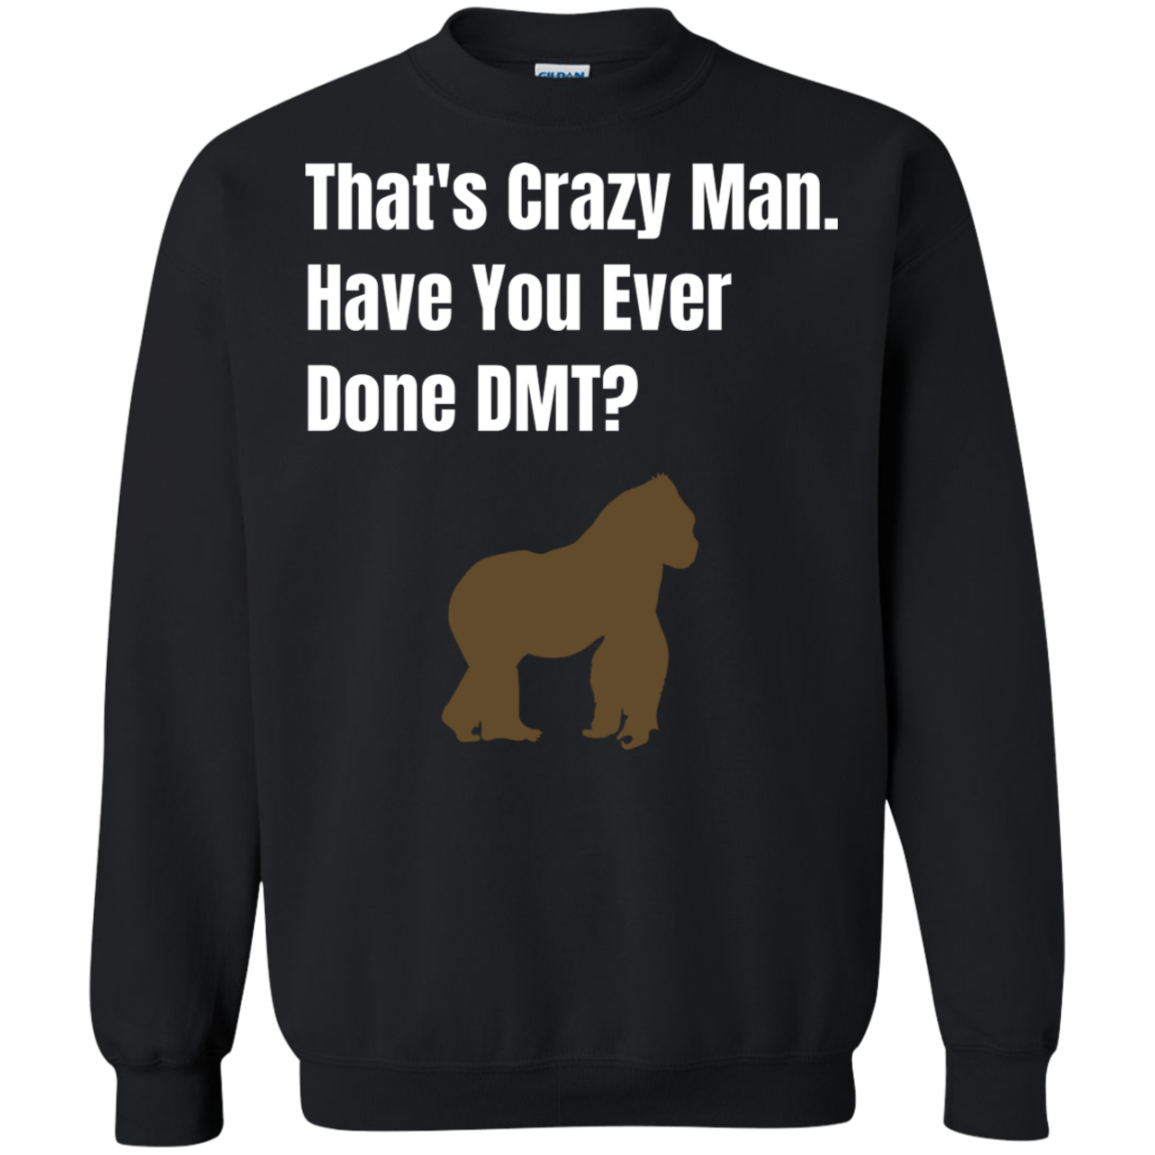 That's Crazy Man Have You Ever Done DMT? Pullover Sweatshirt  8 oz.